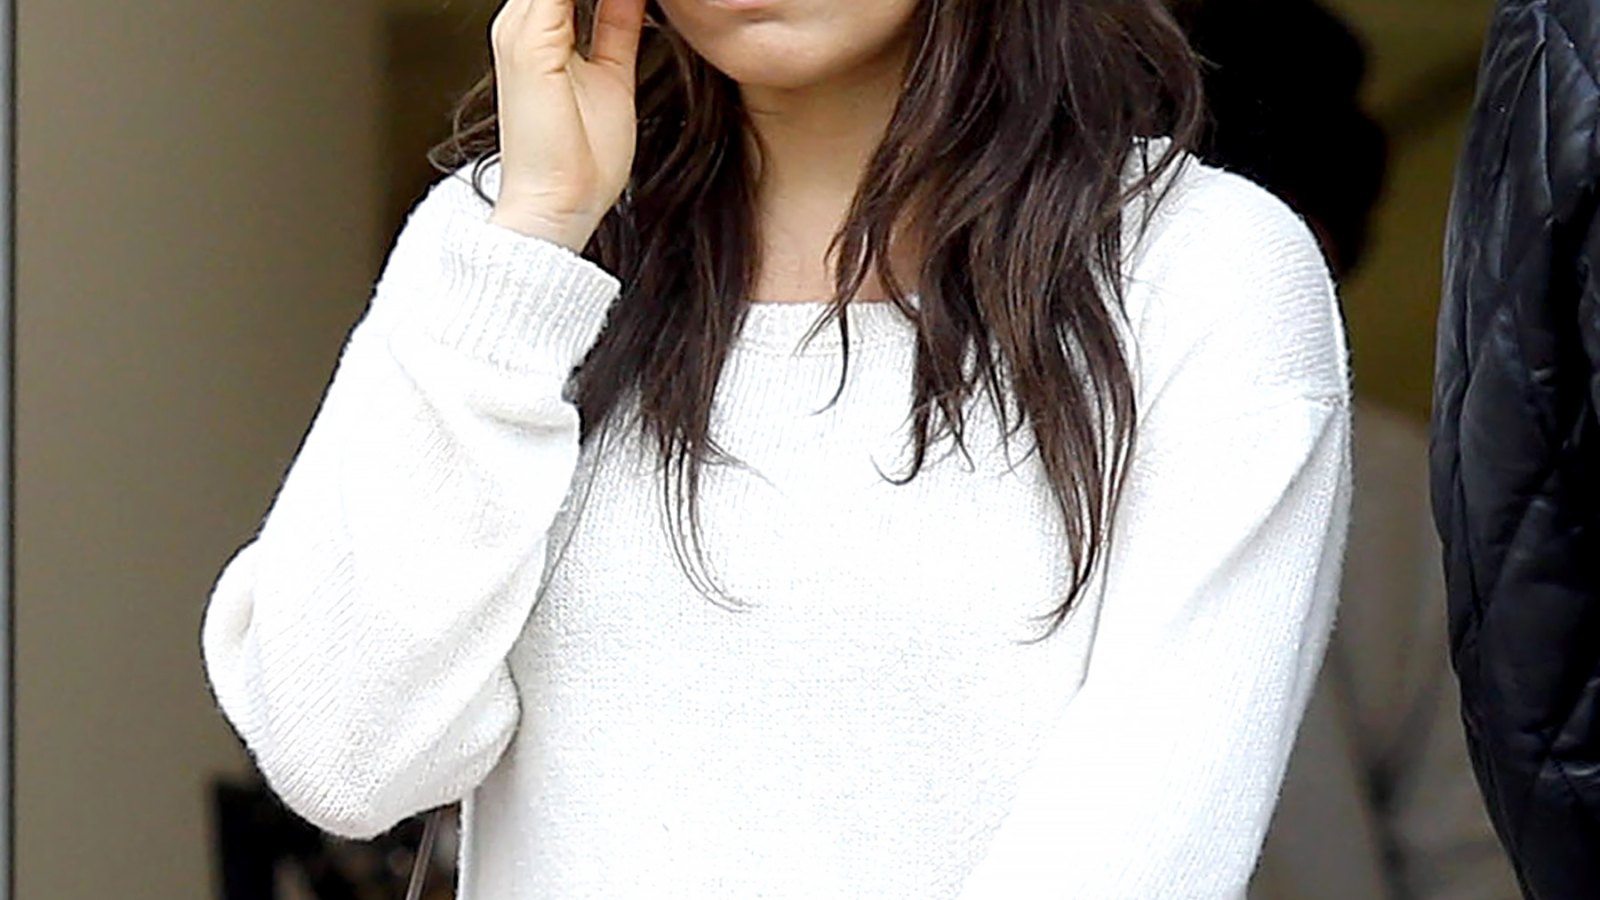 Mila Kunis shows off her new engagement ring on Feb. 27, 2014